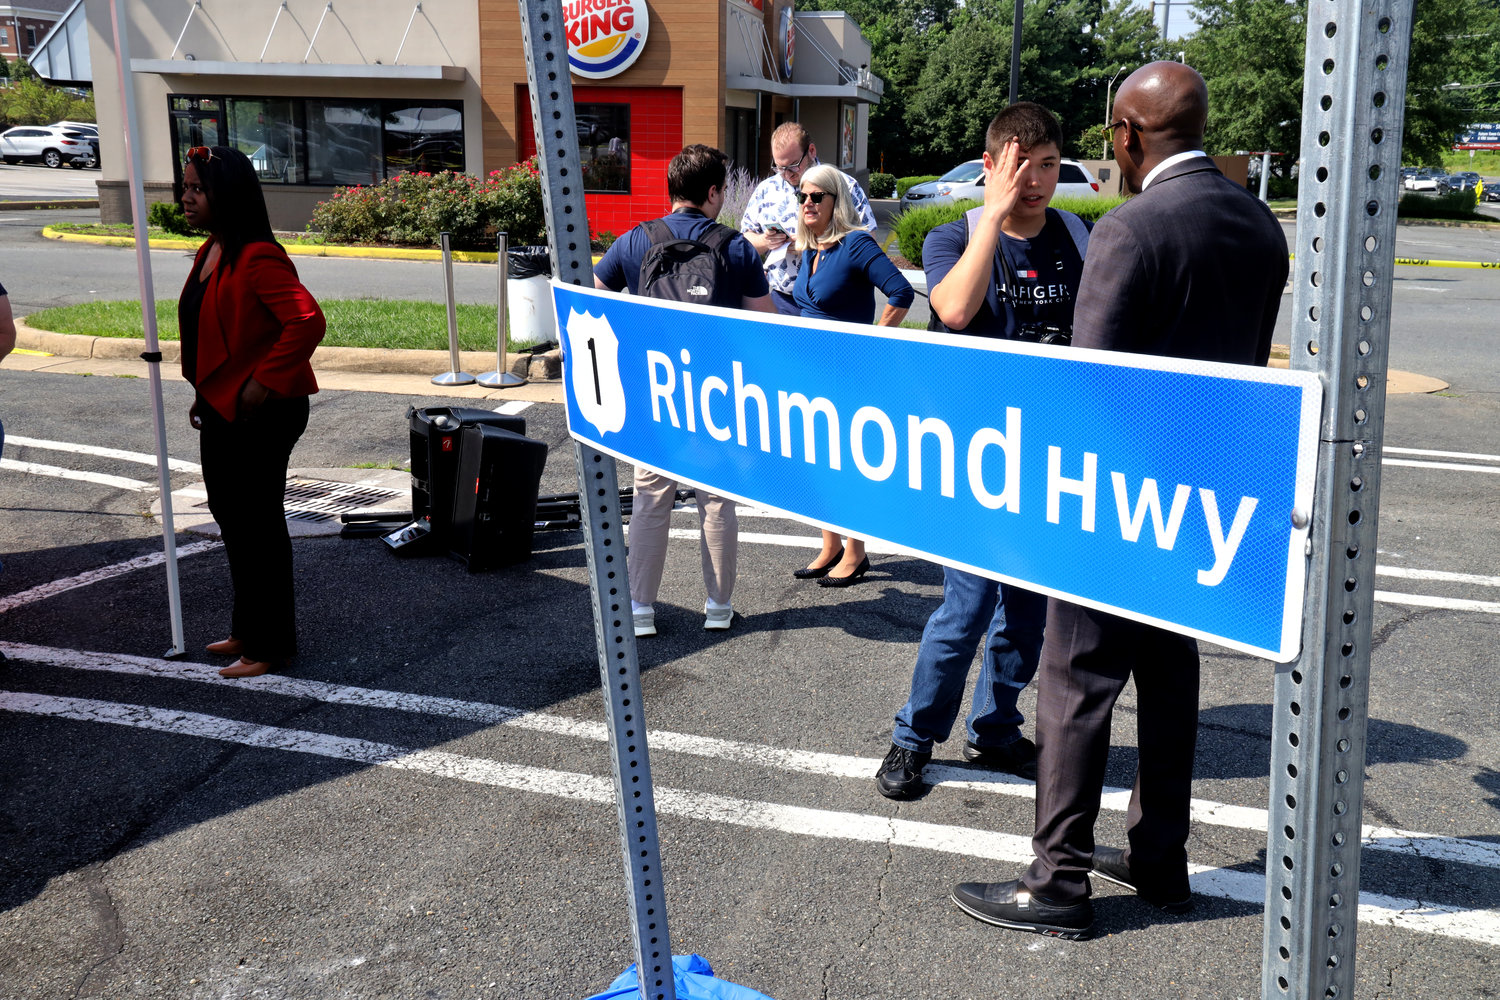 New sign for Richmond Highway revealed